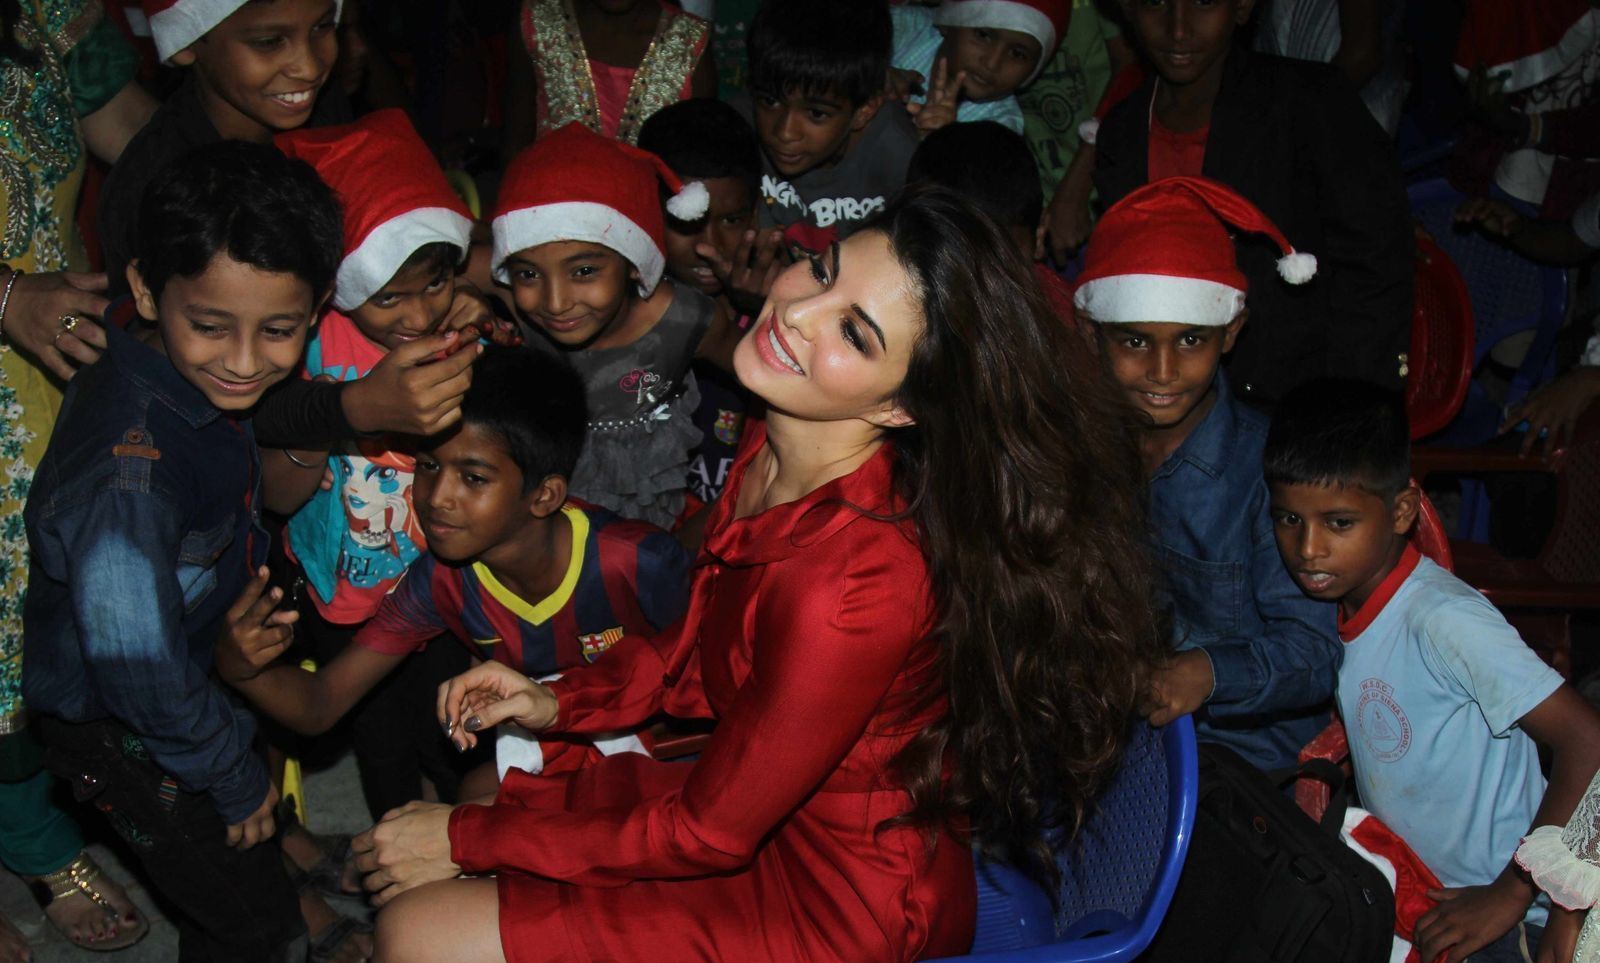 Jacqueline Fernandez Looks Super Sexy In Red Dress As She Celebrates Christmas With The Angel Xpress Foundation in Mumbai